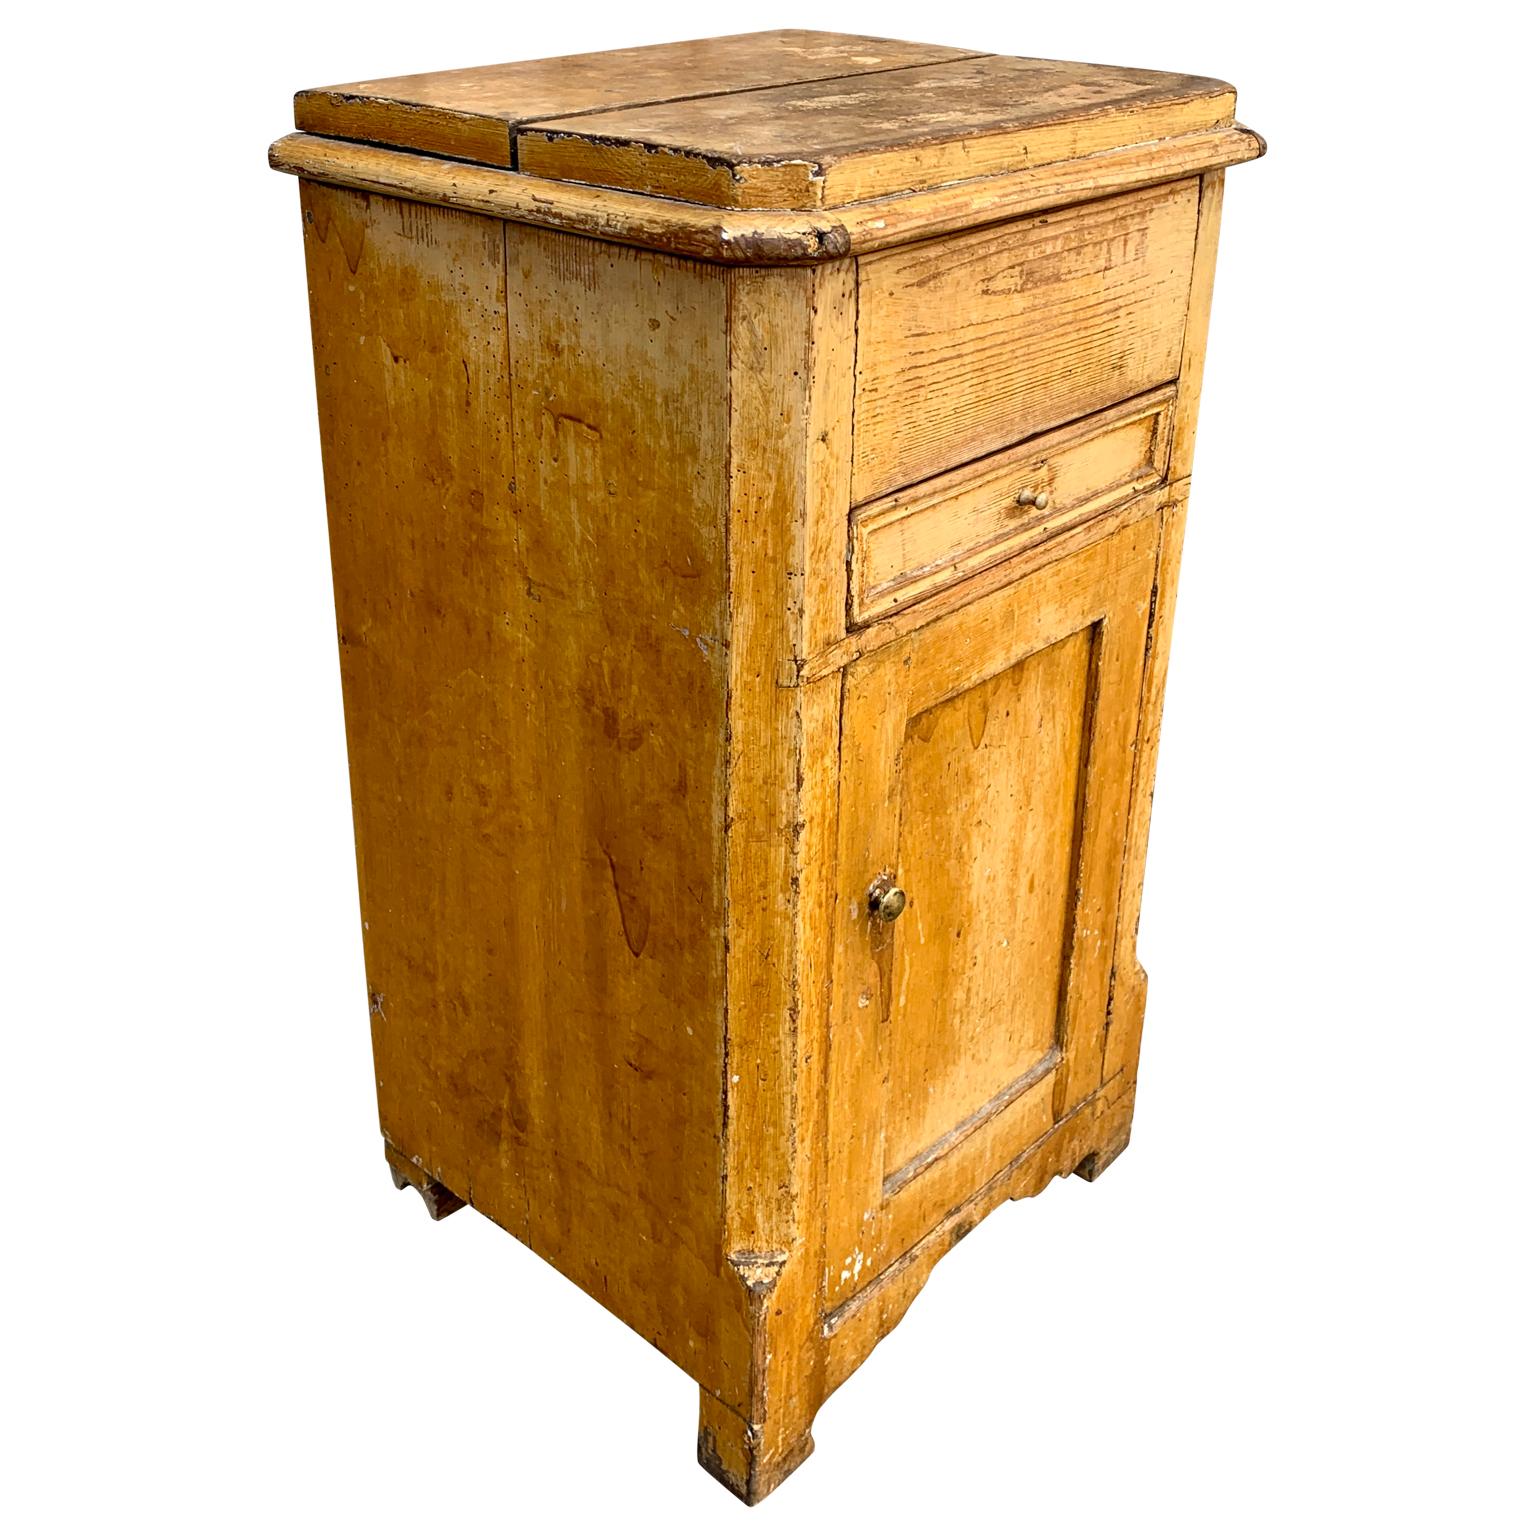 An early 19th century yellow original painted Swedish nightstand or side table with one drawer, liftable top and a door in the front. This Gustavian rural furniture's keeps totally the original paint, patina and the charming worn condition due to